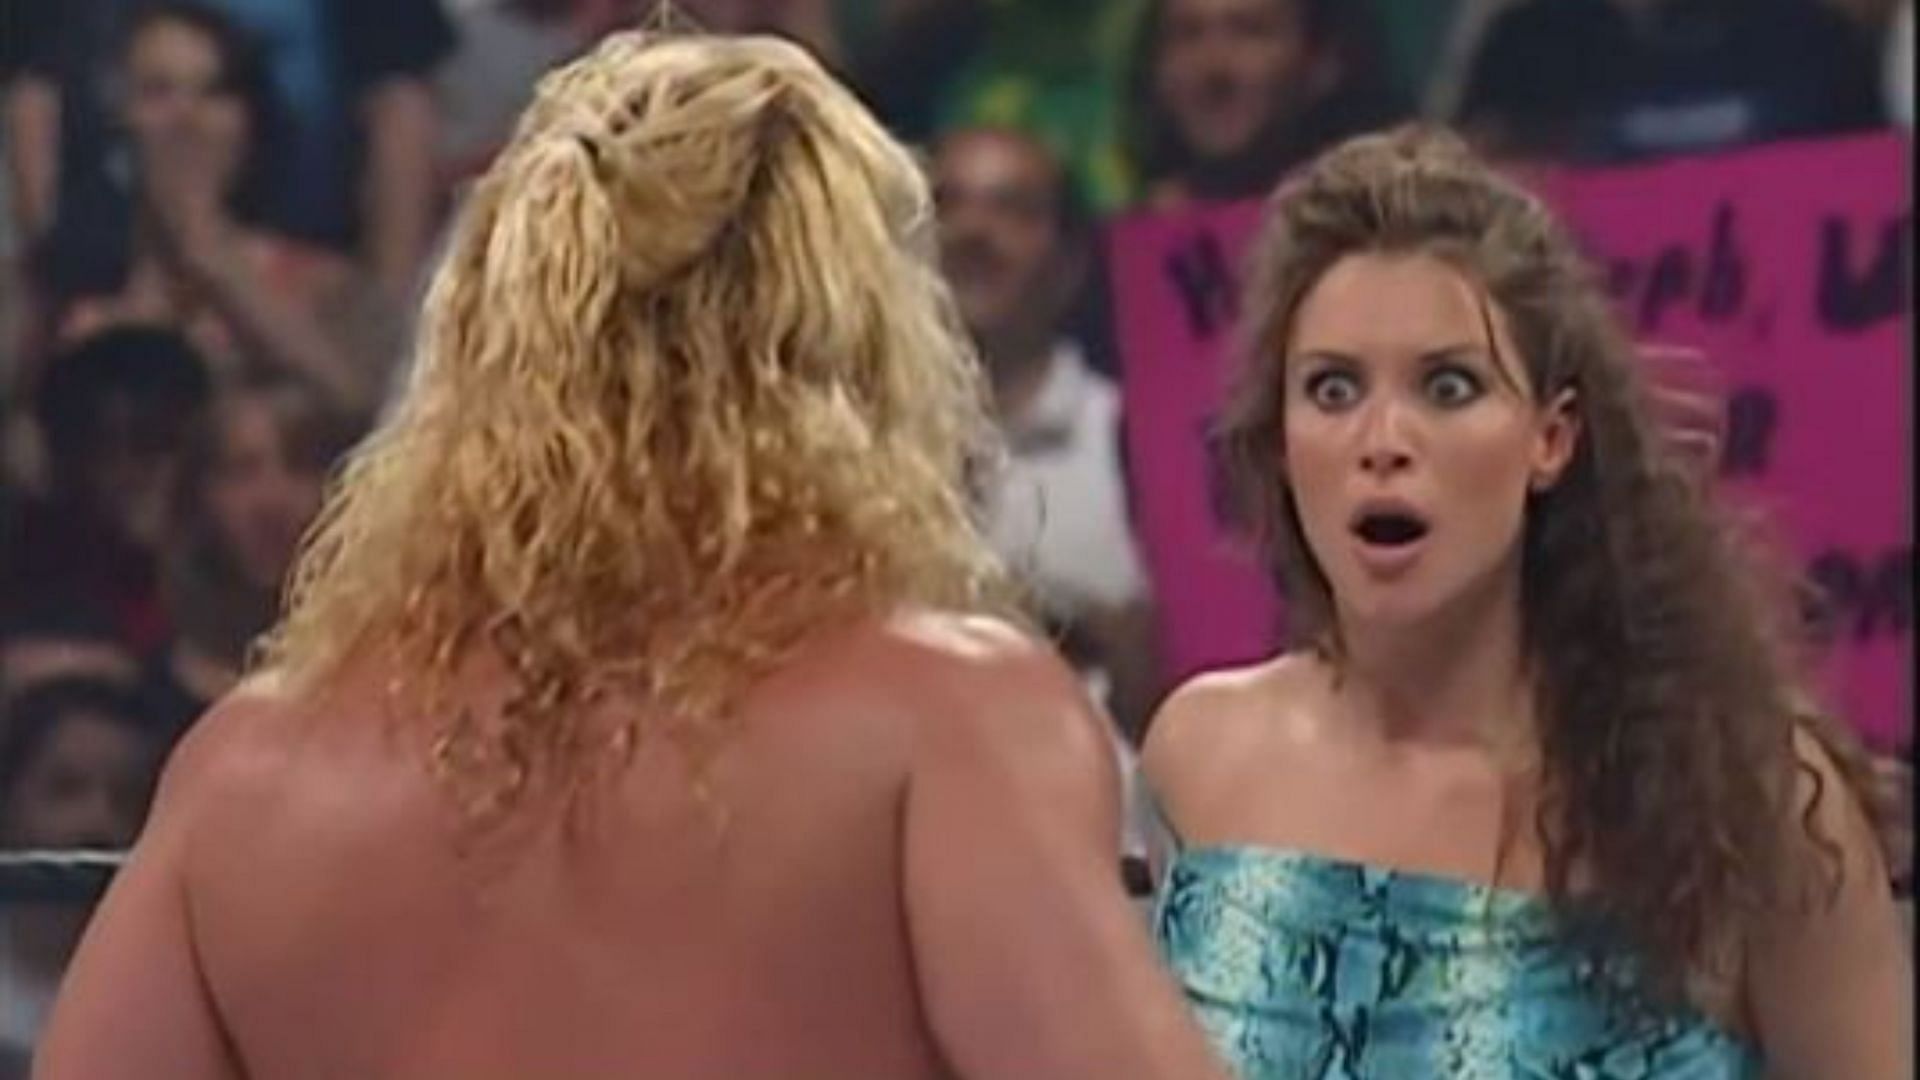 cory jock recommends wwe stephanie mcmahon kiss pic